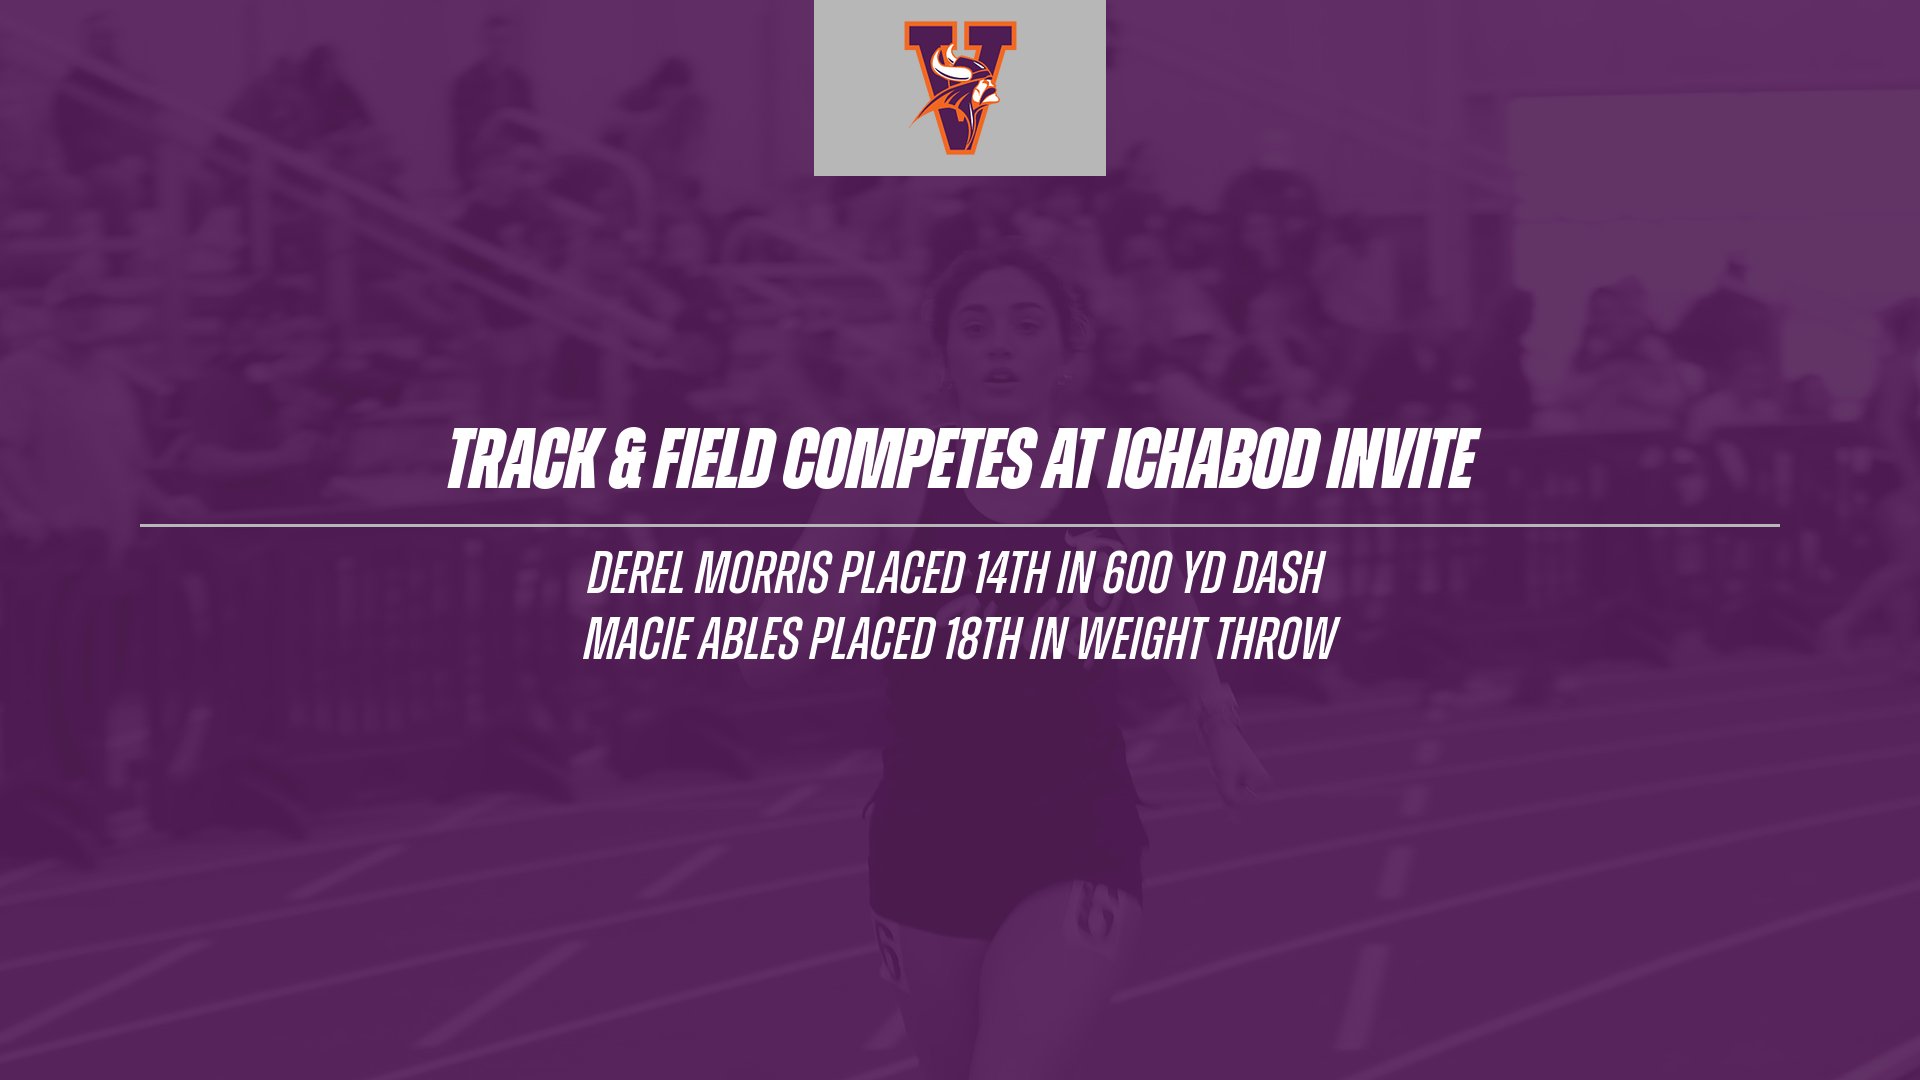 Track and Field Teams Competes at Ichabod Invite